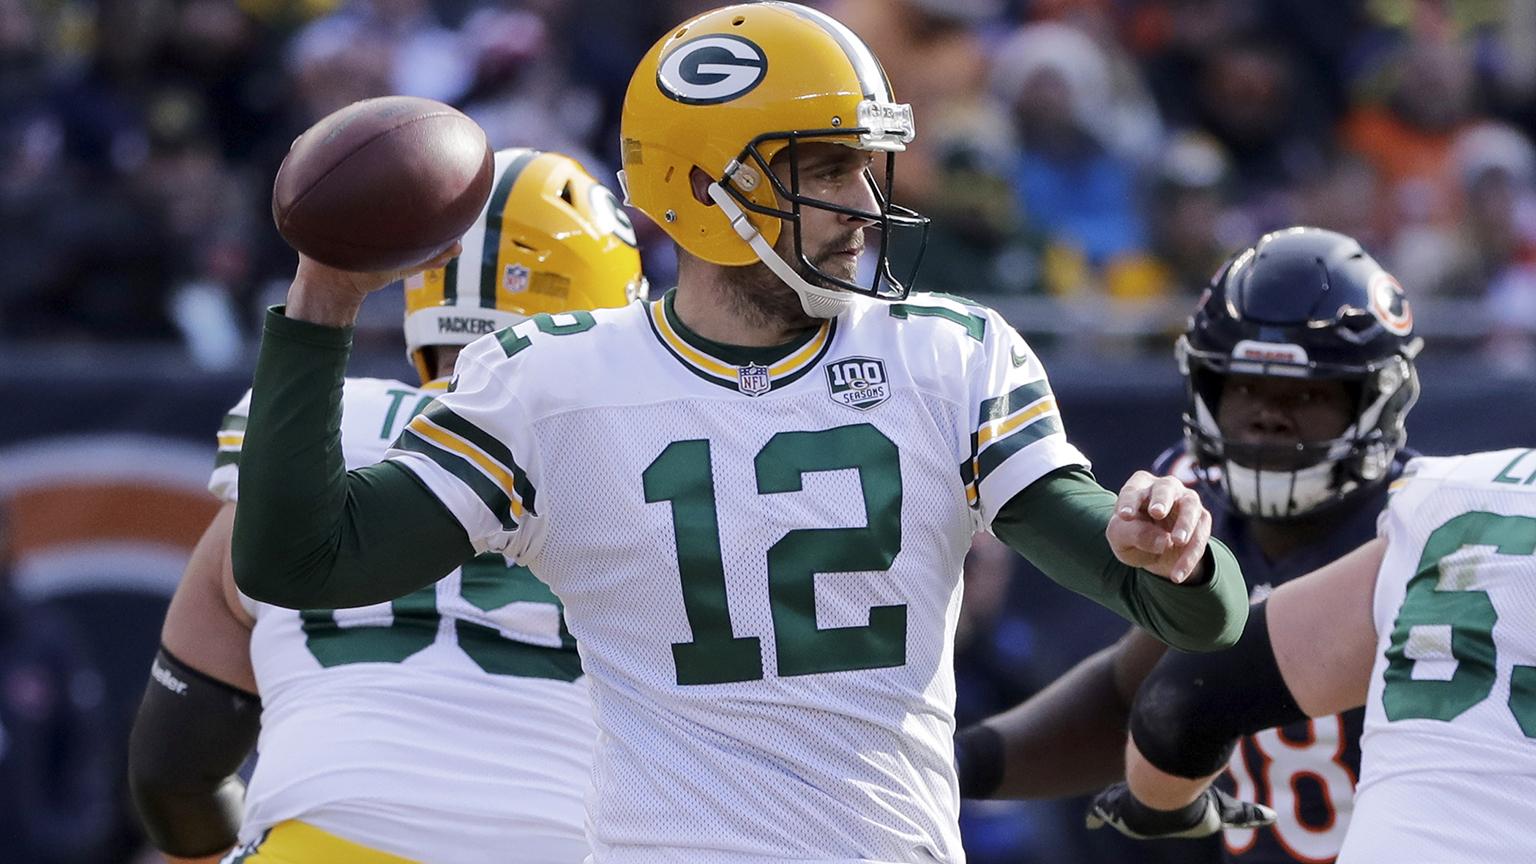 Green Bay Packers quarterback Aaron Rodgers (12) throws a pass during the first half of the Sunday, Dec. 16, 2018 NFL football game against the Chicago Bears. (Nam Y. Huh / AP Photo)